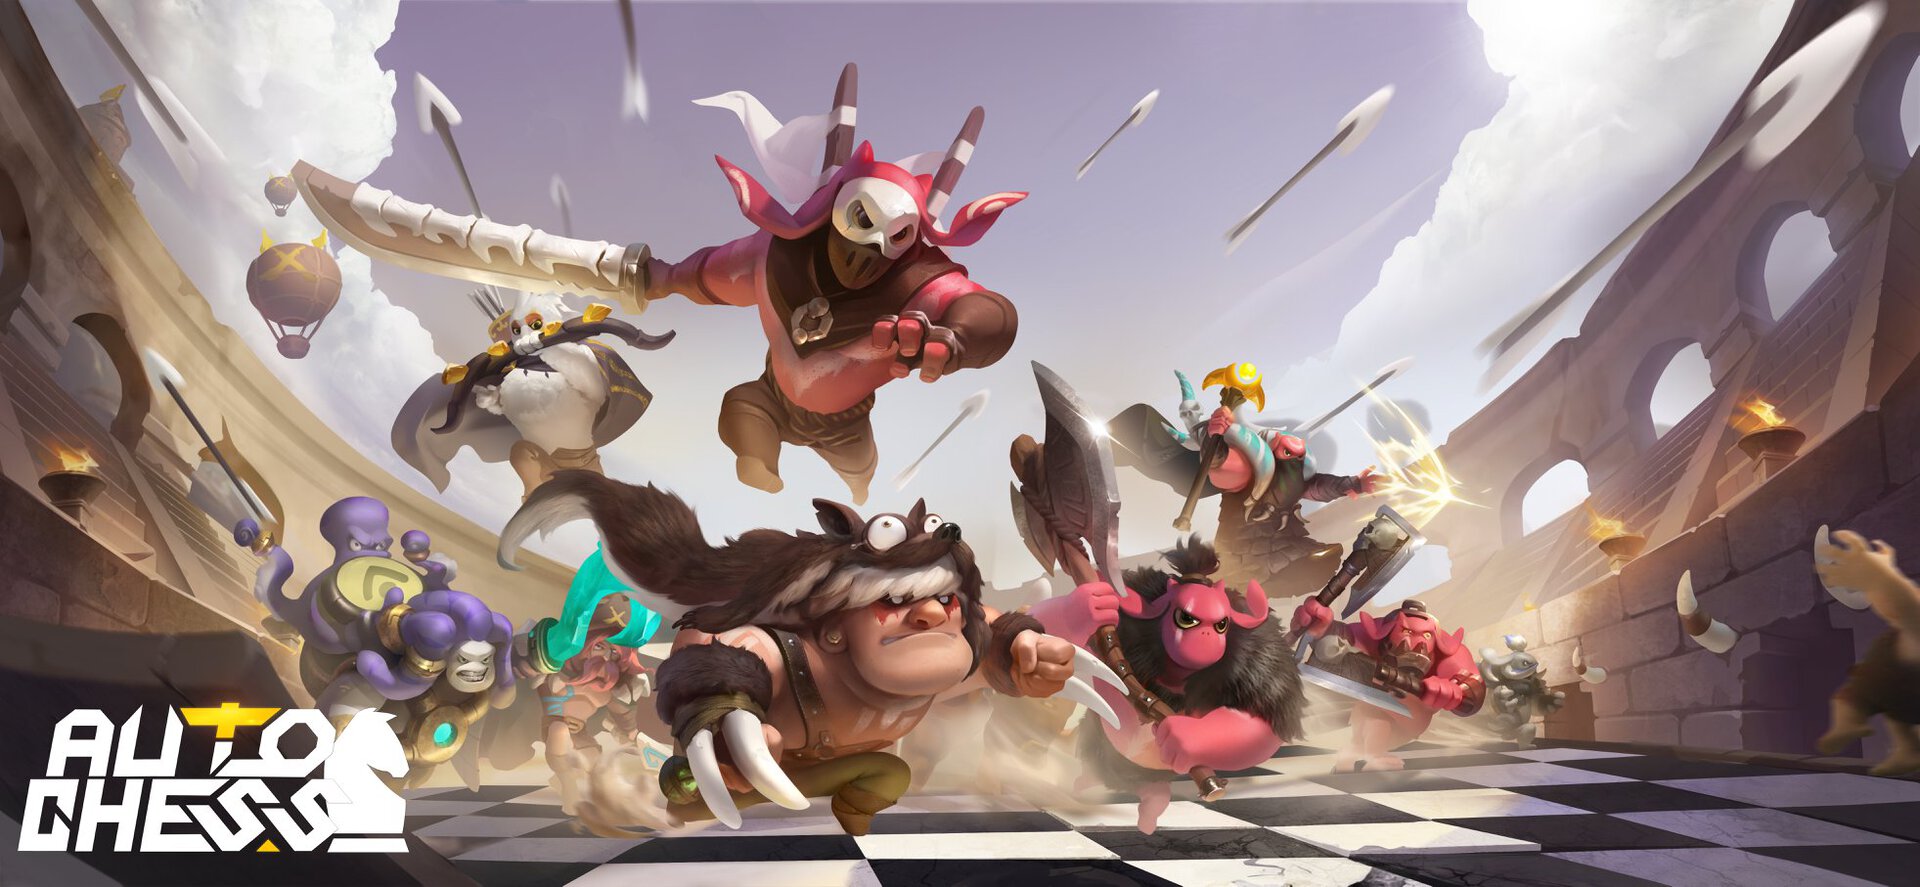 A Guide To Auto Chess, 2019's Most Popular New Game Genre